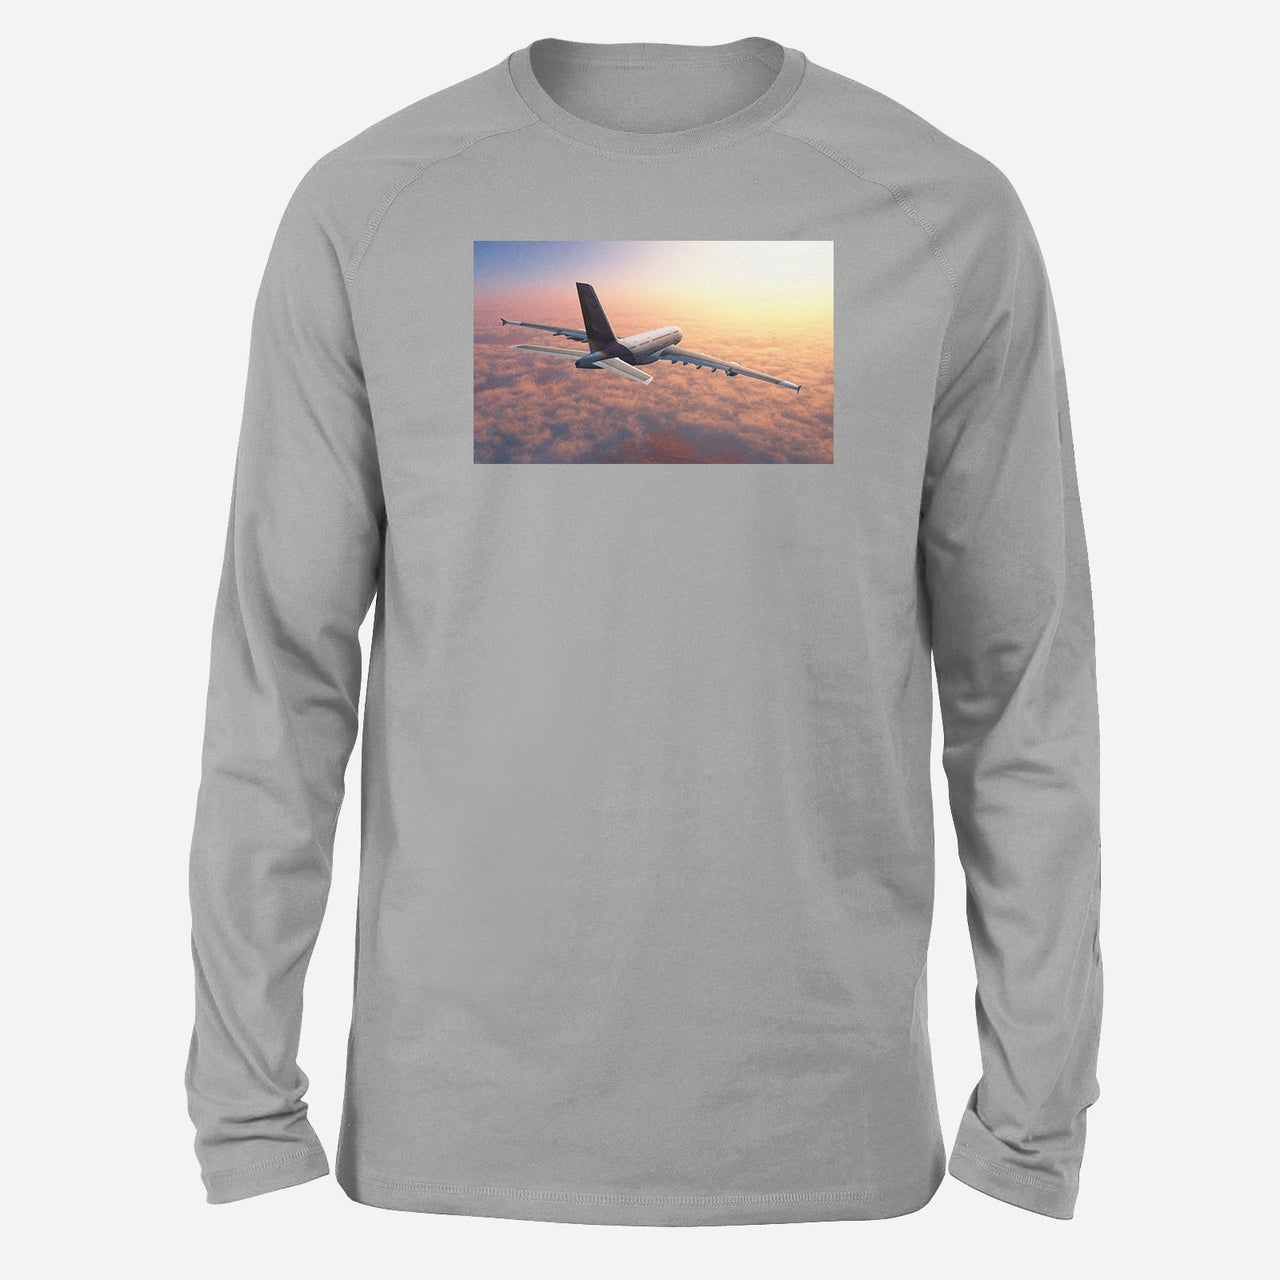 Super Cruising Airbus A380 over Clouds Designed Long-Sleeve T-Shirts